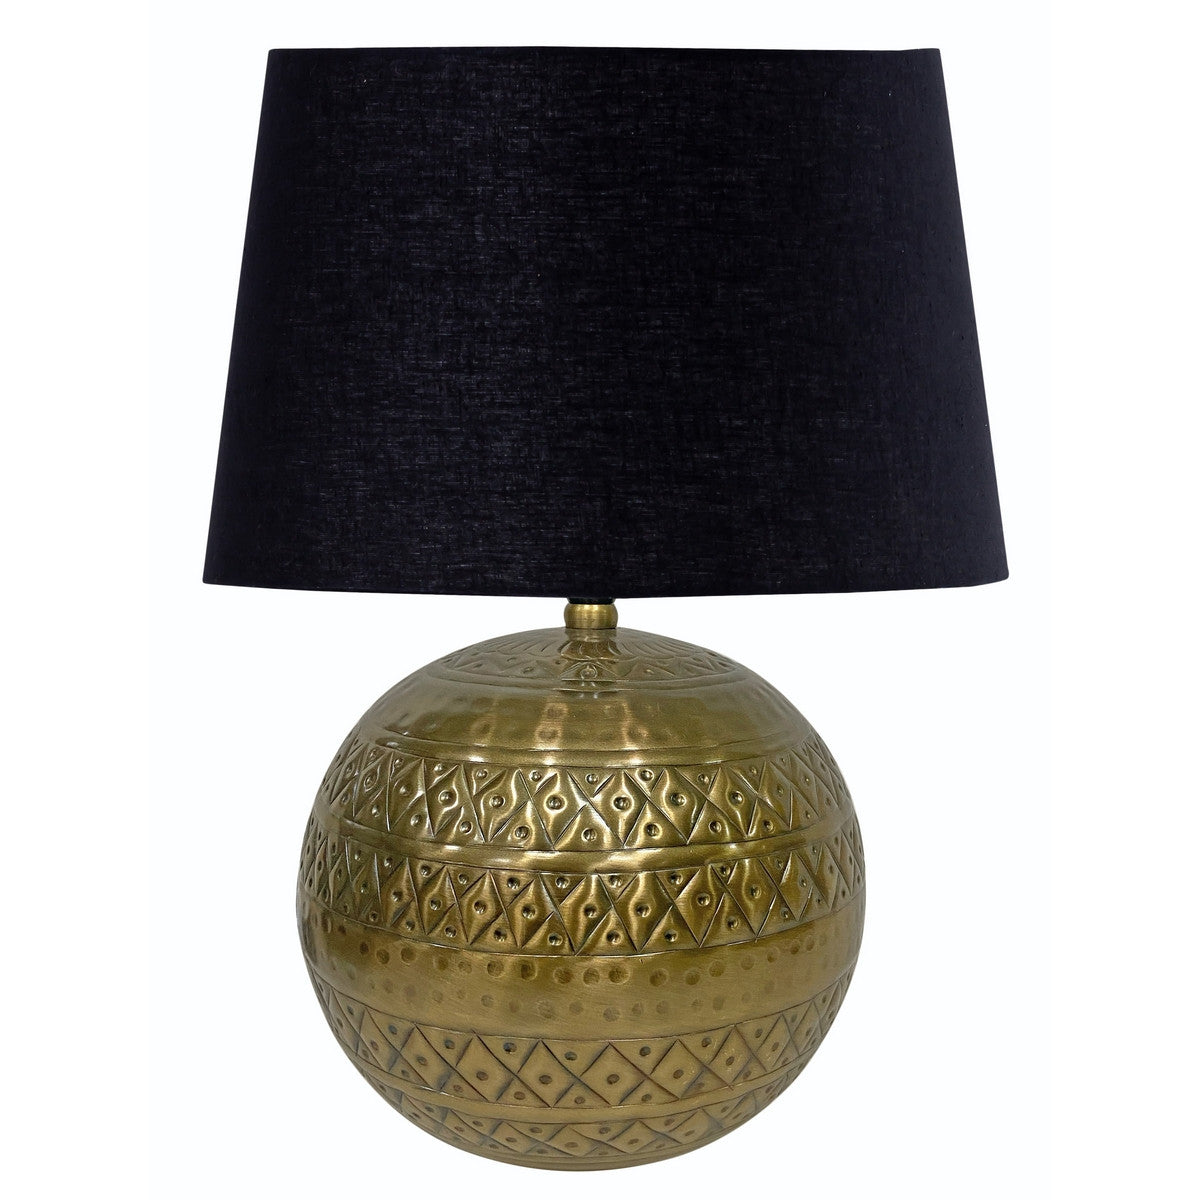 Table Lamp & Shade - Antique Brass / Black Cotton